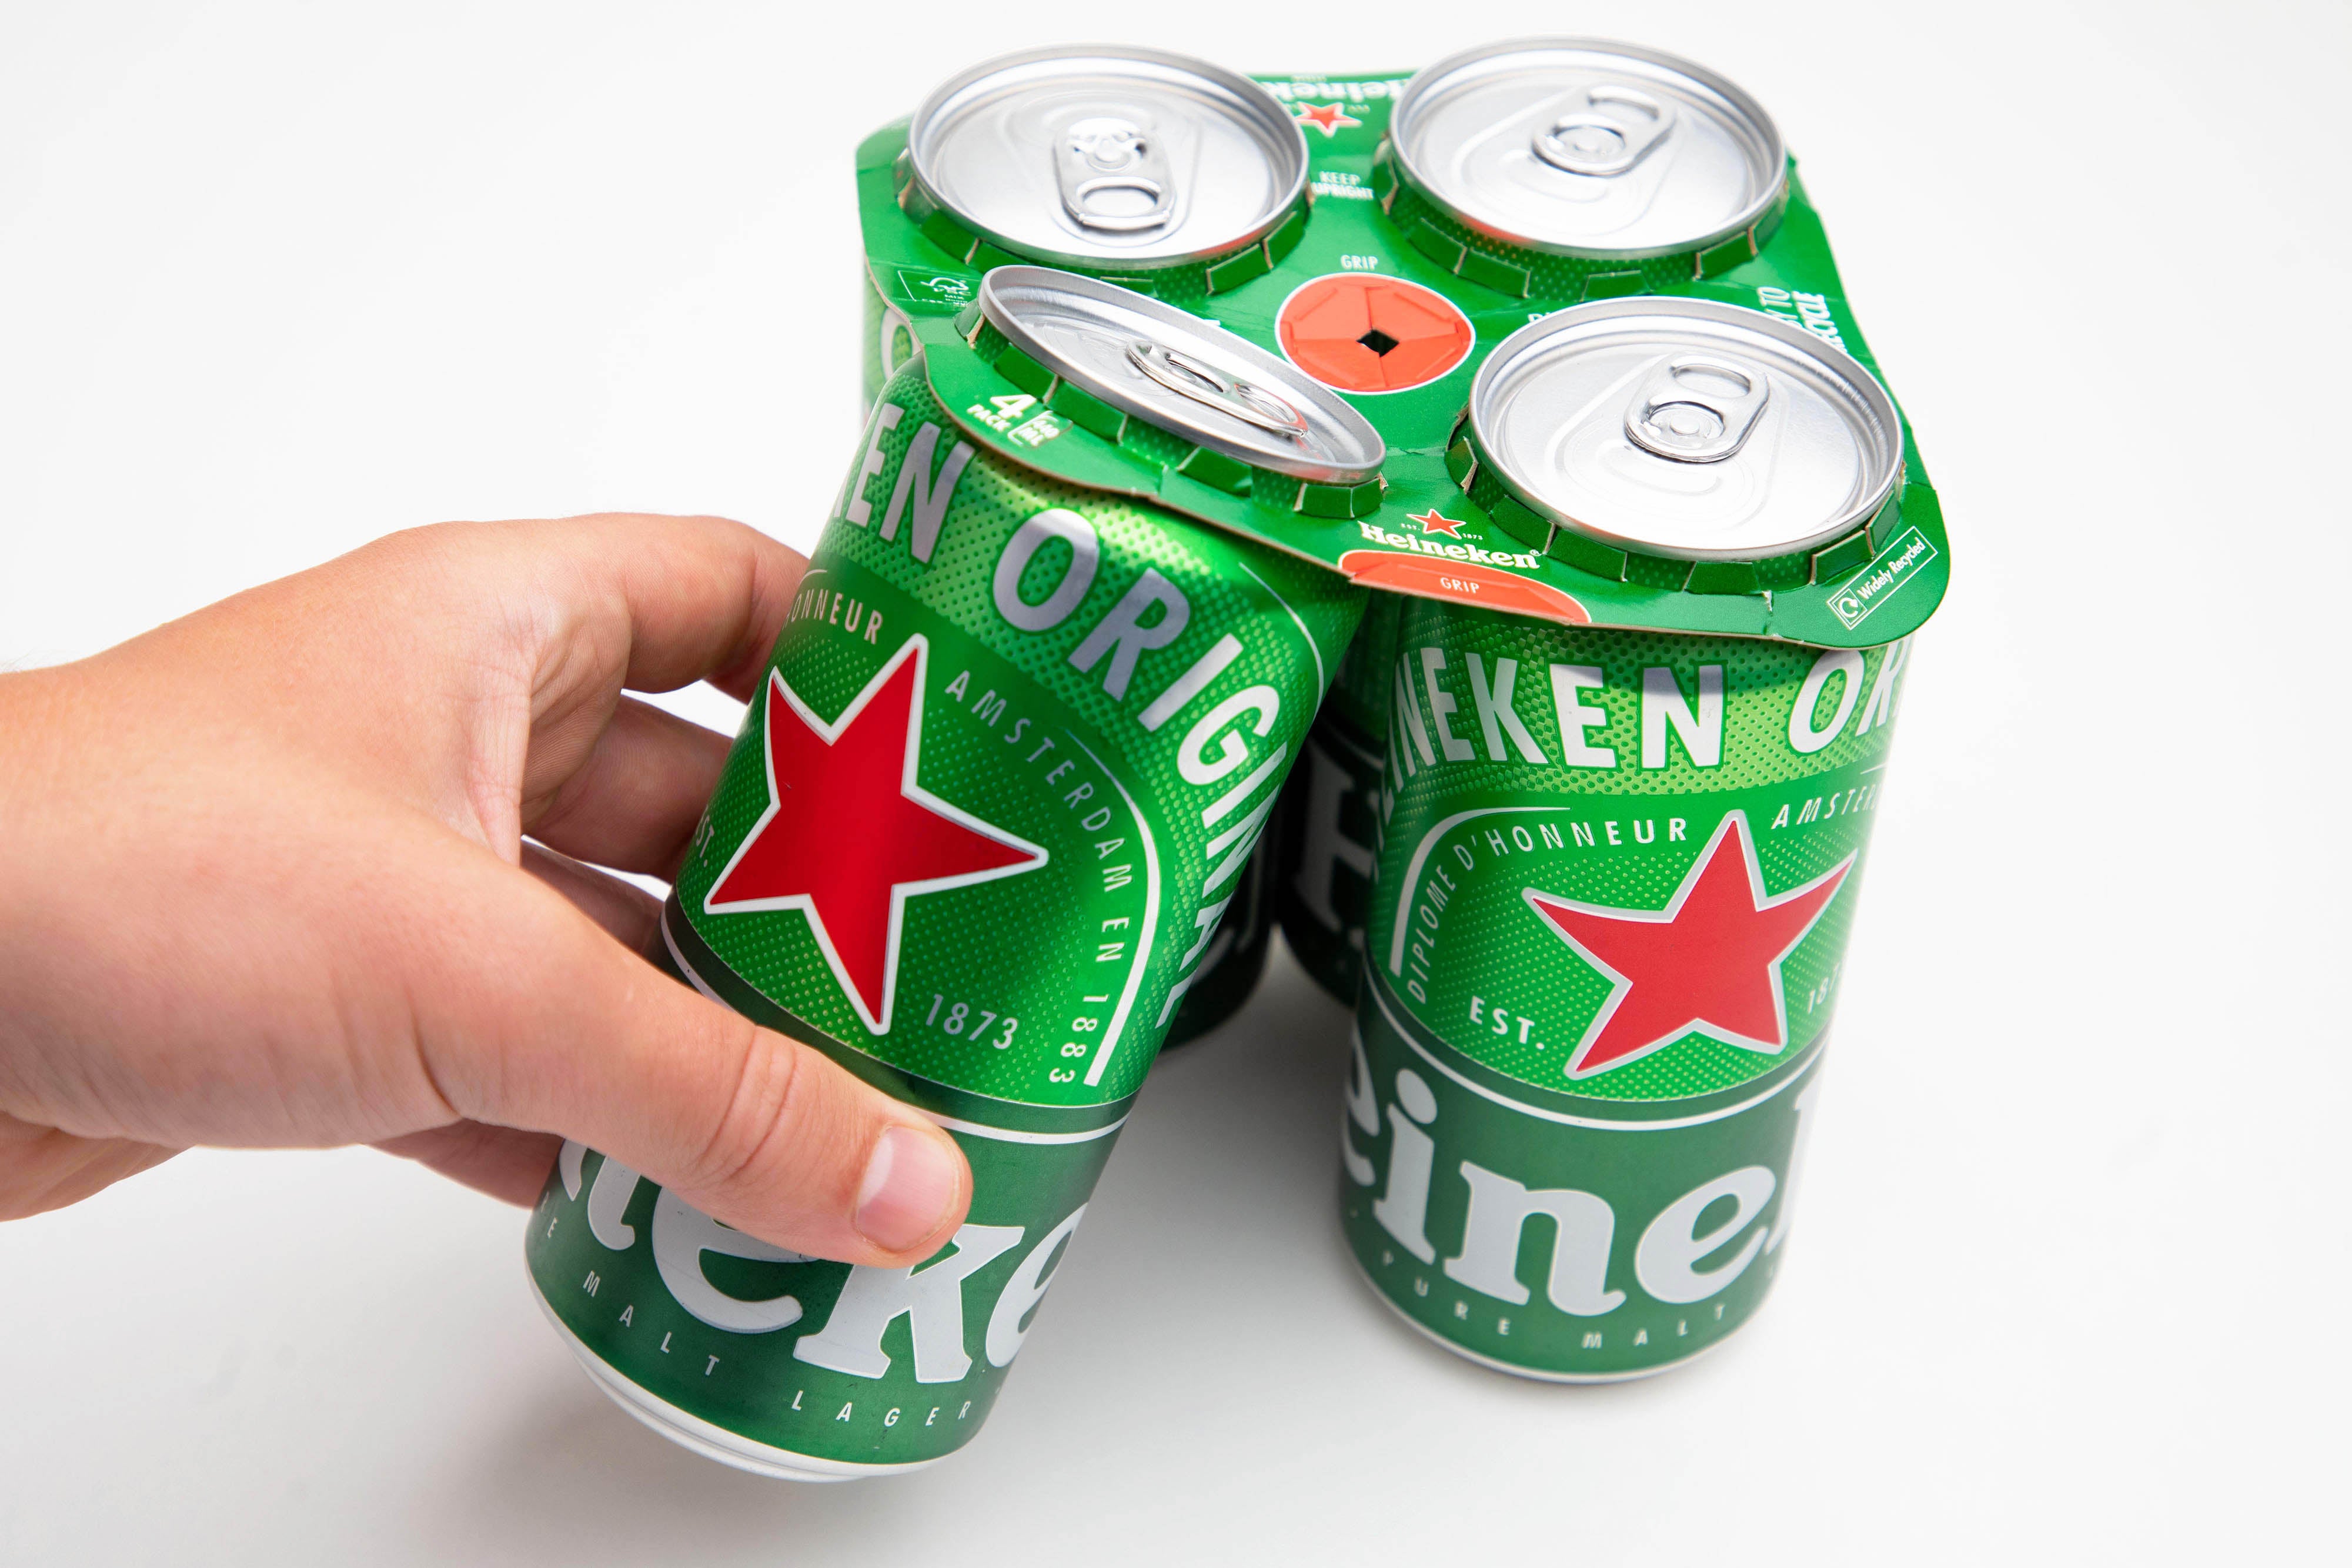 Heineken has acknowledged the contest as a scam, telling users not to click on any links or forward any messages